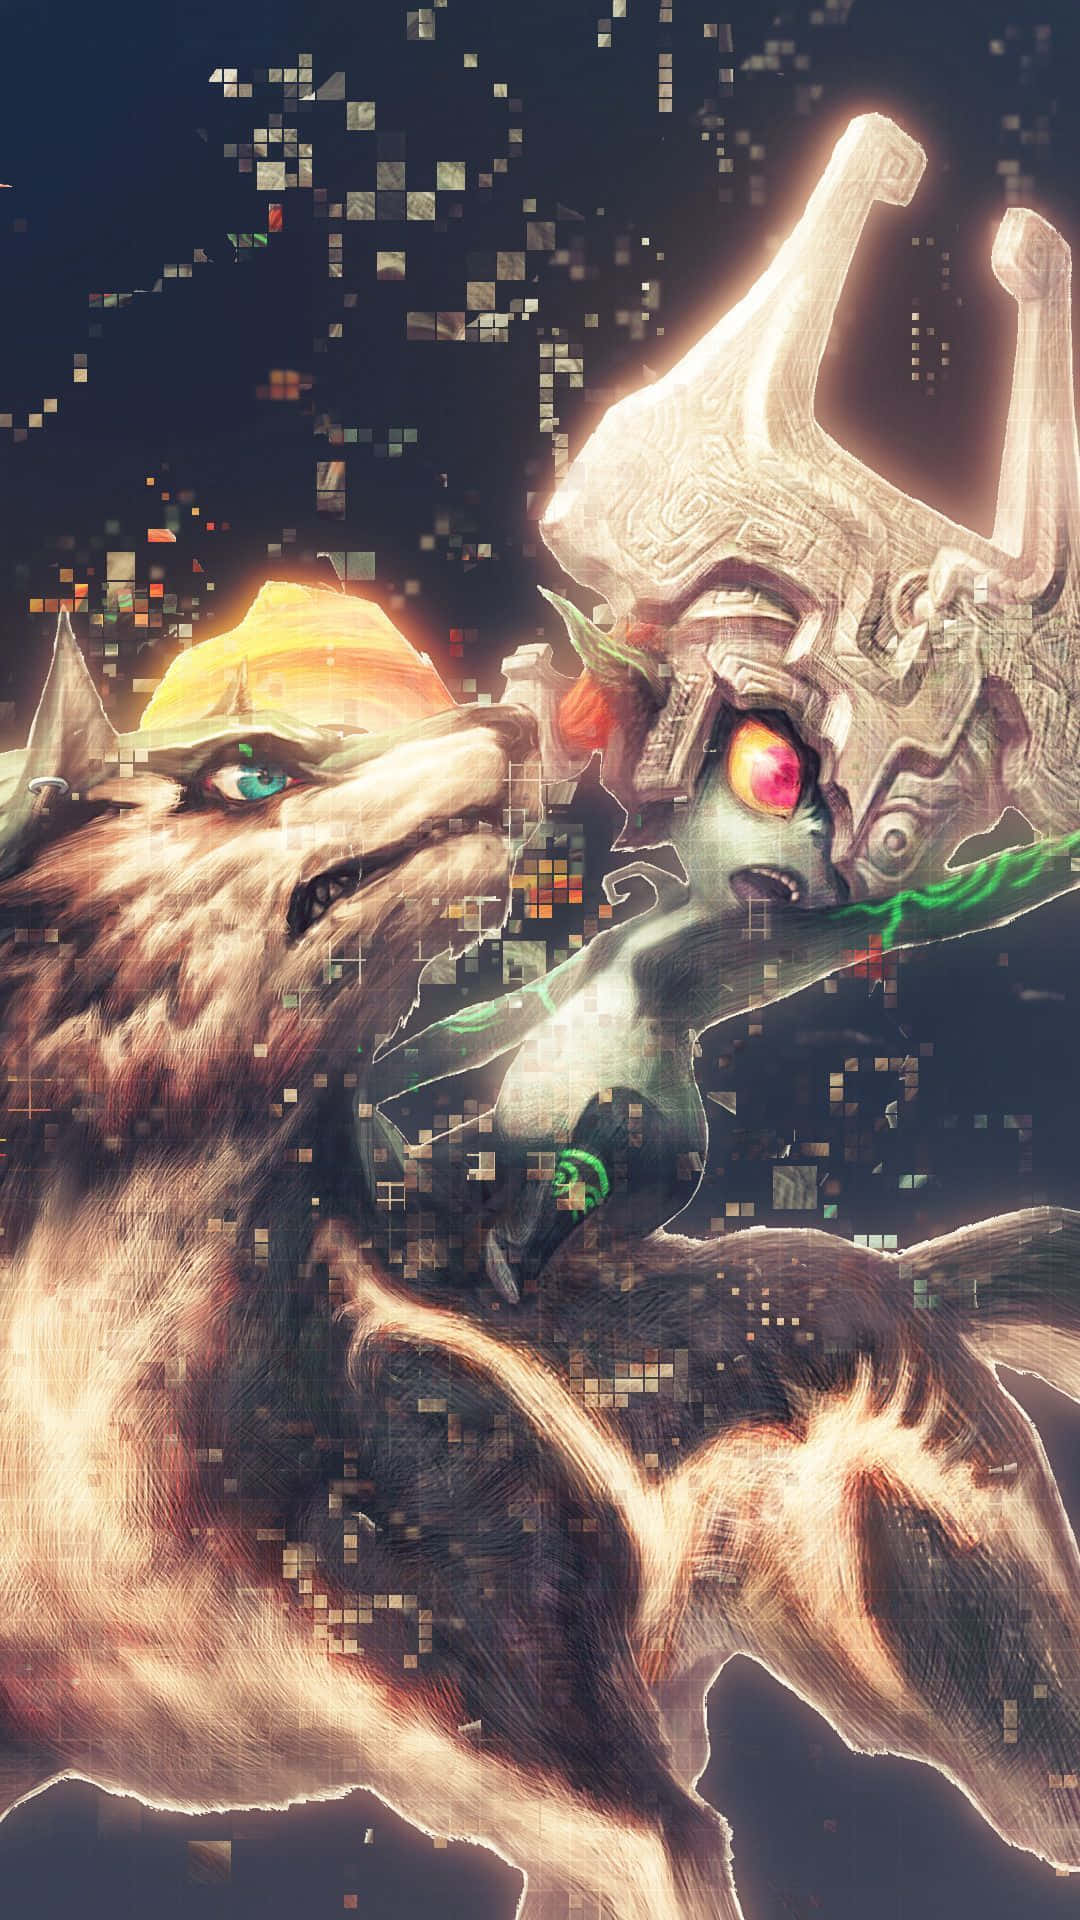 Midna and Link in the Twilight Realm Wallpaper